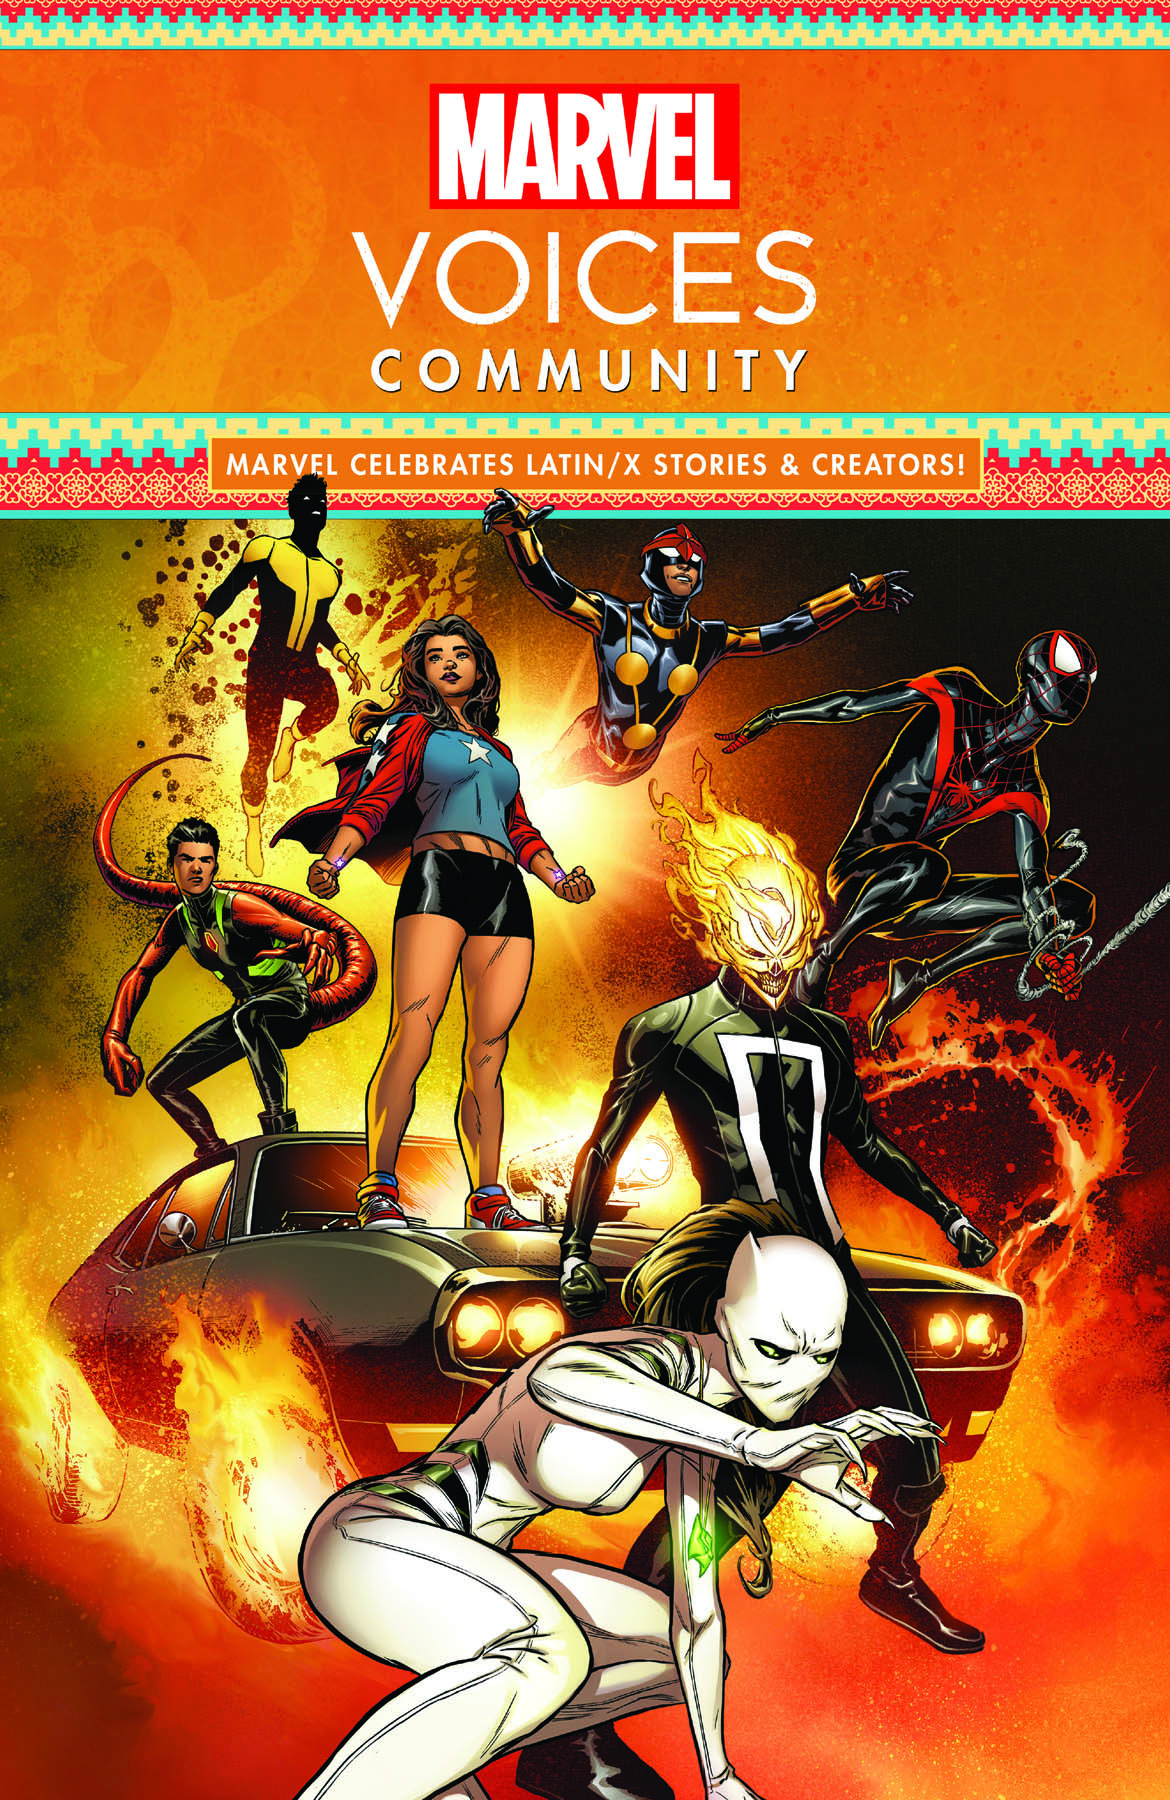 Marvel's Voices: Community (Trade Paperback)